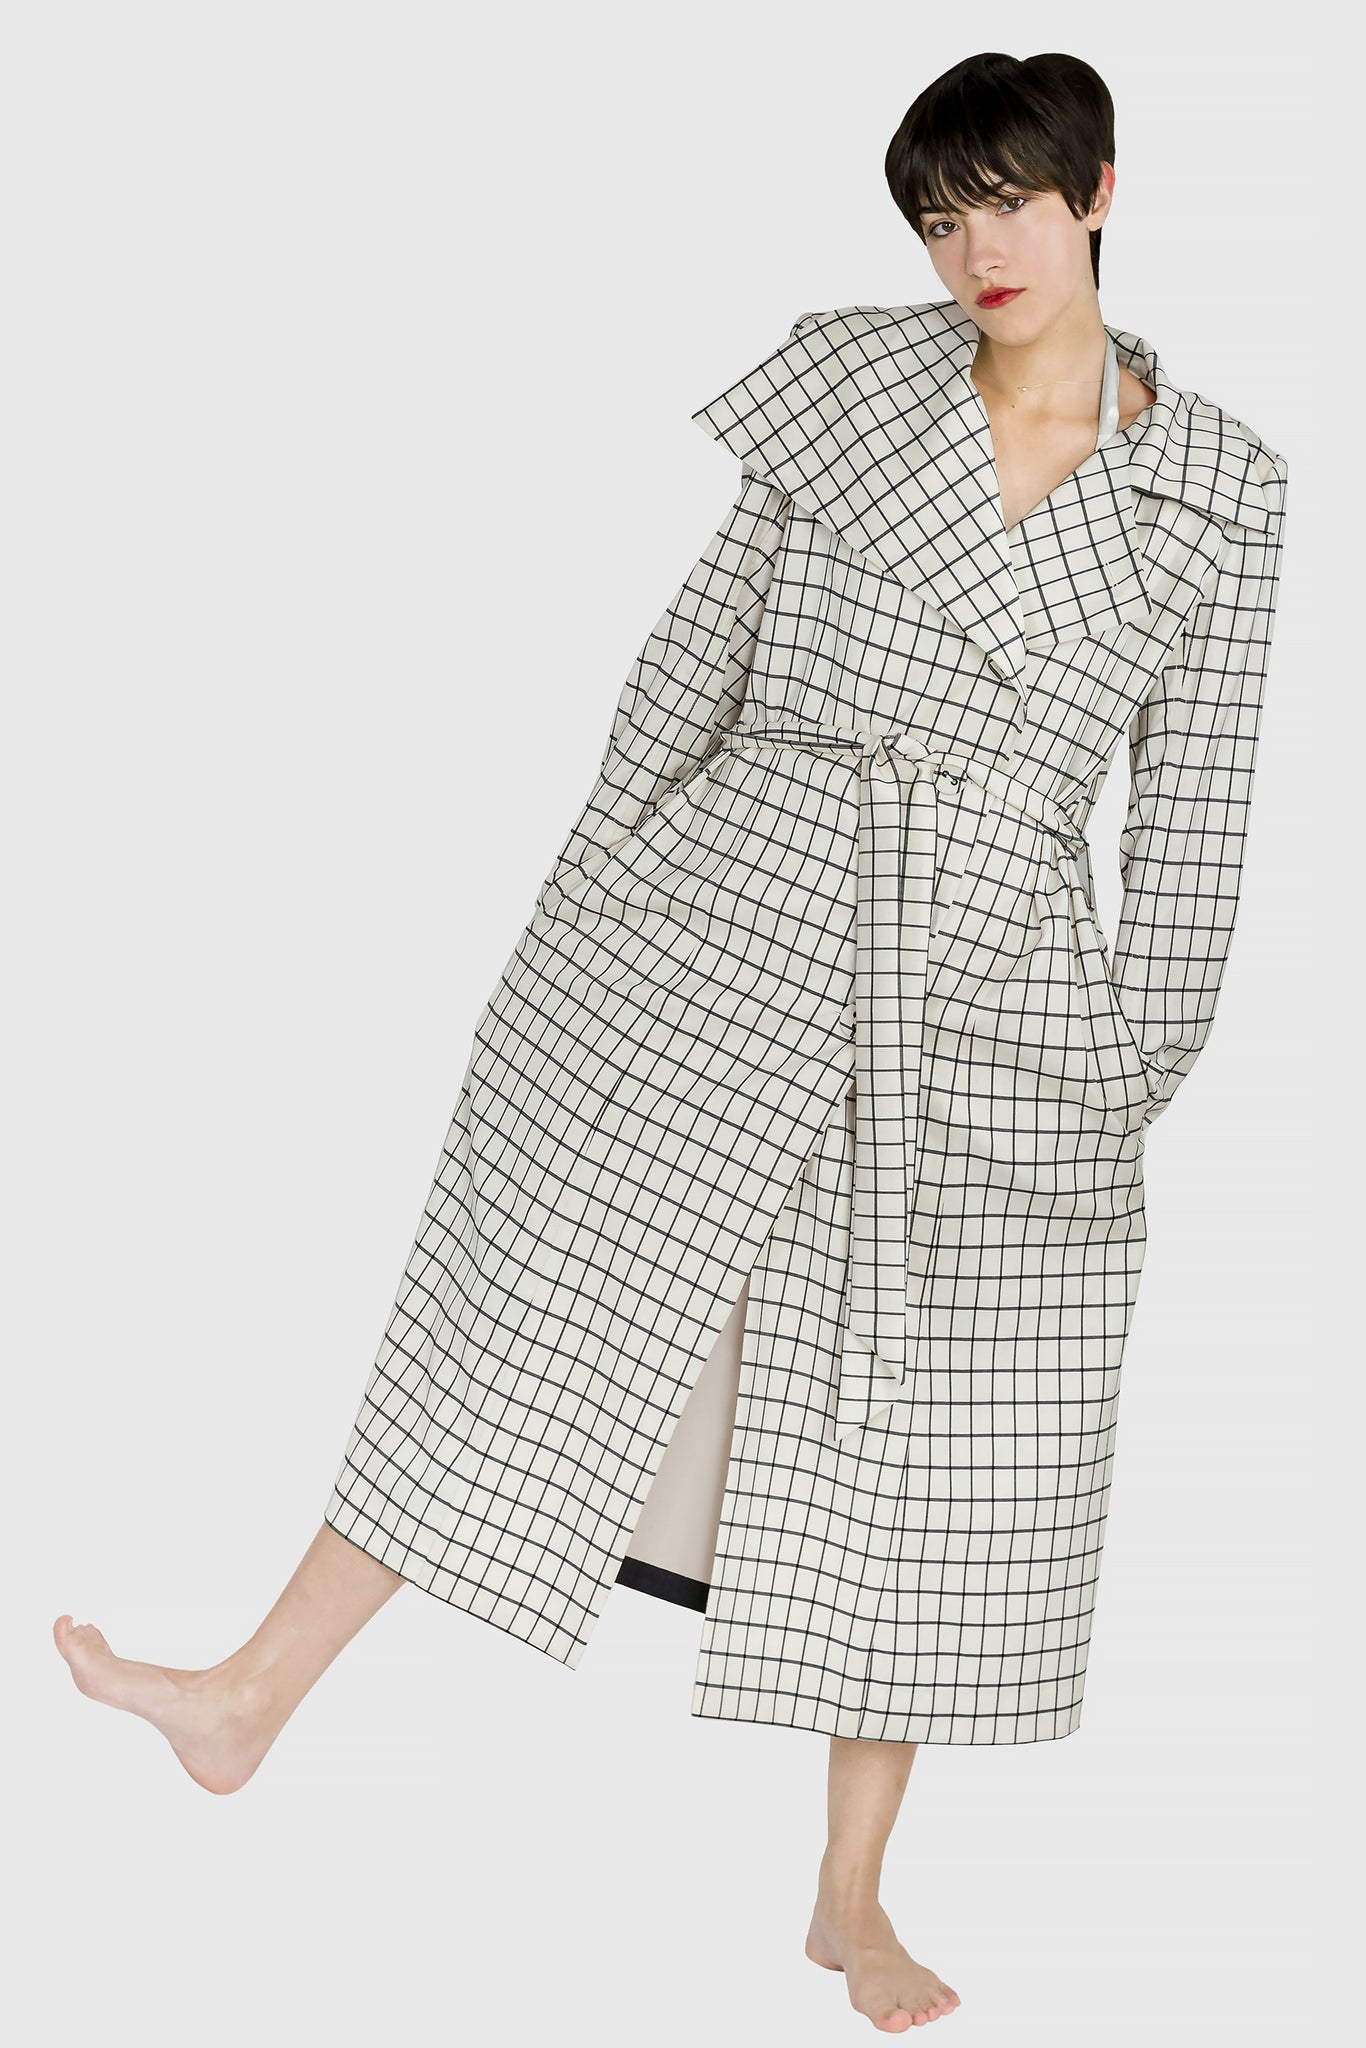 film noir women's trench coat, long, black and white, grid pattern, large collar , vintage elegant, designed by Ruxandra, tailored in soft wool